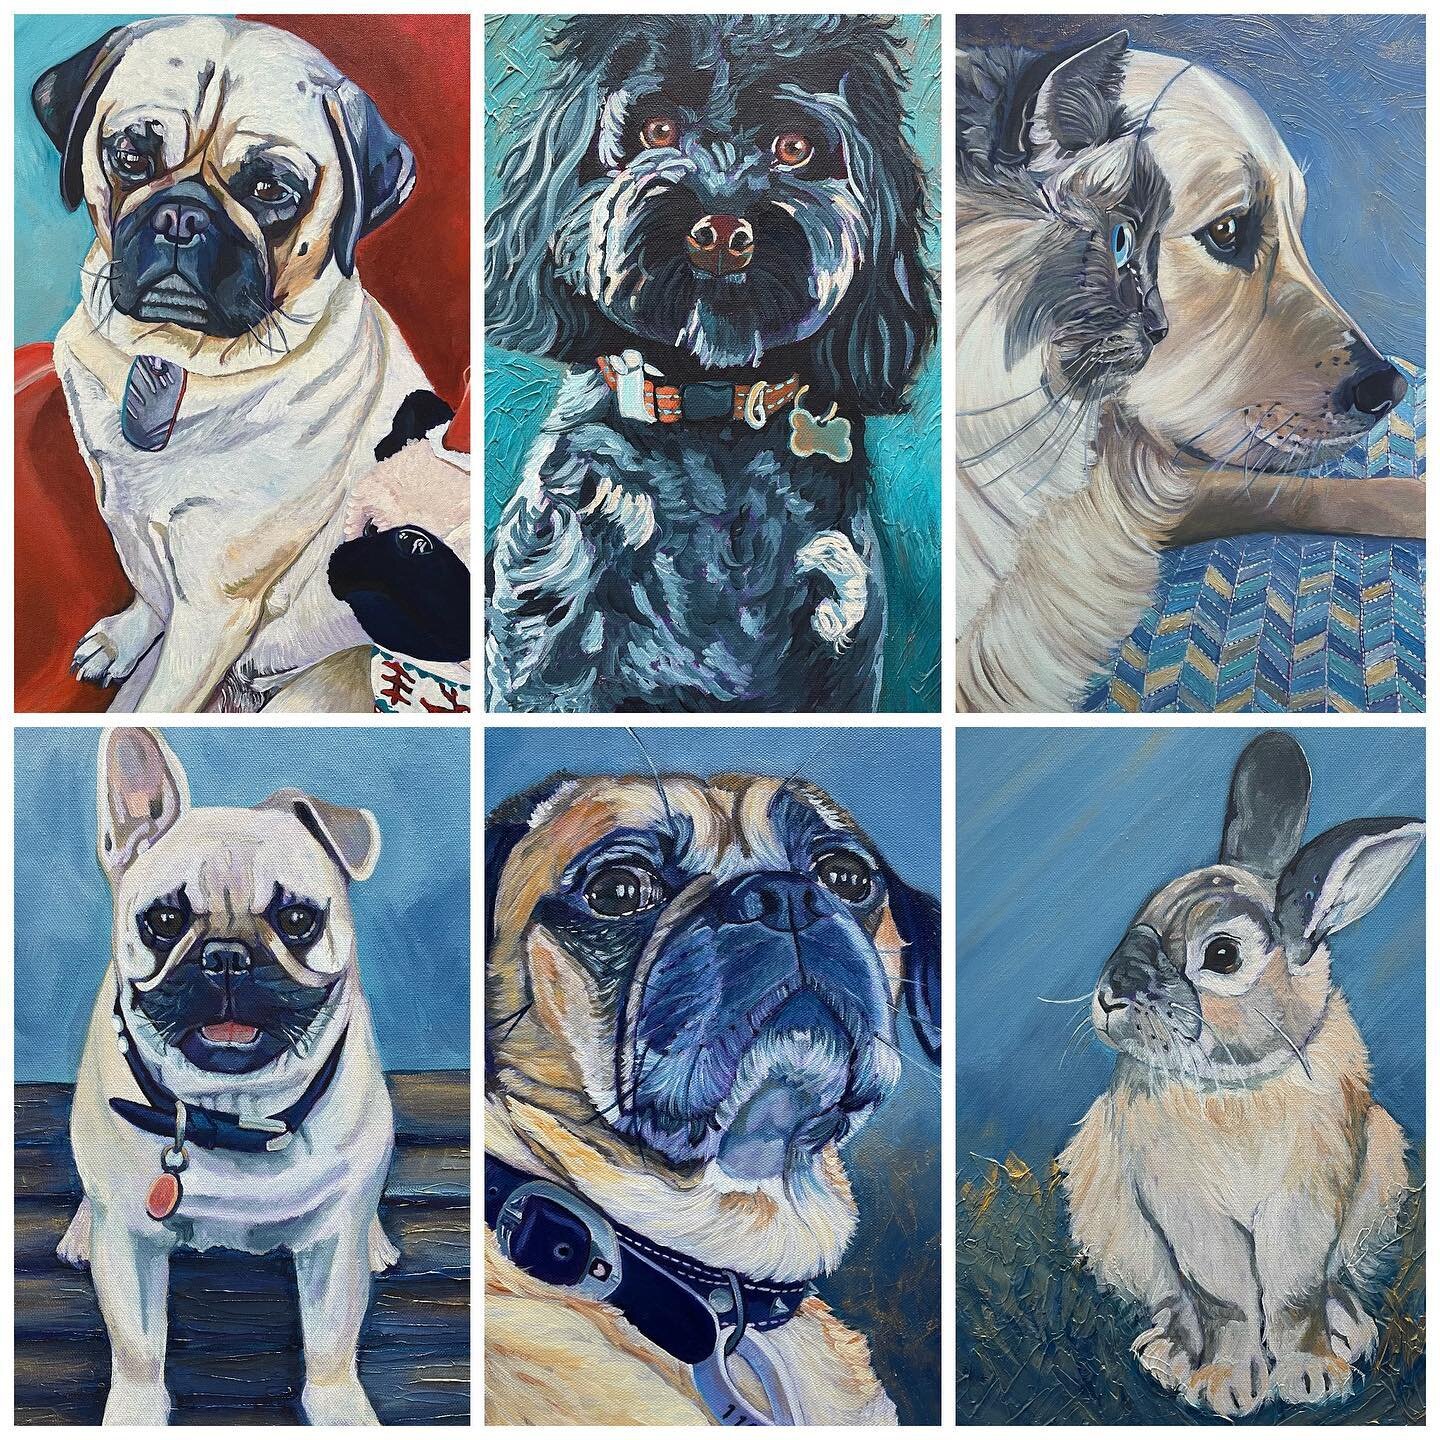 Some of the wonderful pets I have captured this year so far. Once you have painted someone&rsquo;s beloved pet, it really feels like you know them. Even though I have never actually met these beautiful animals. Each of them now has a special place in